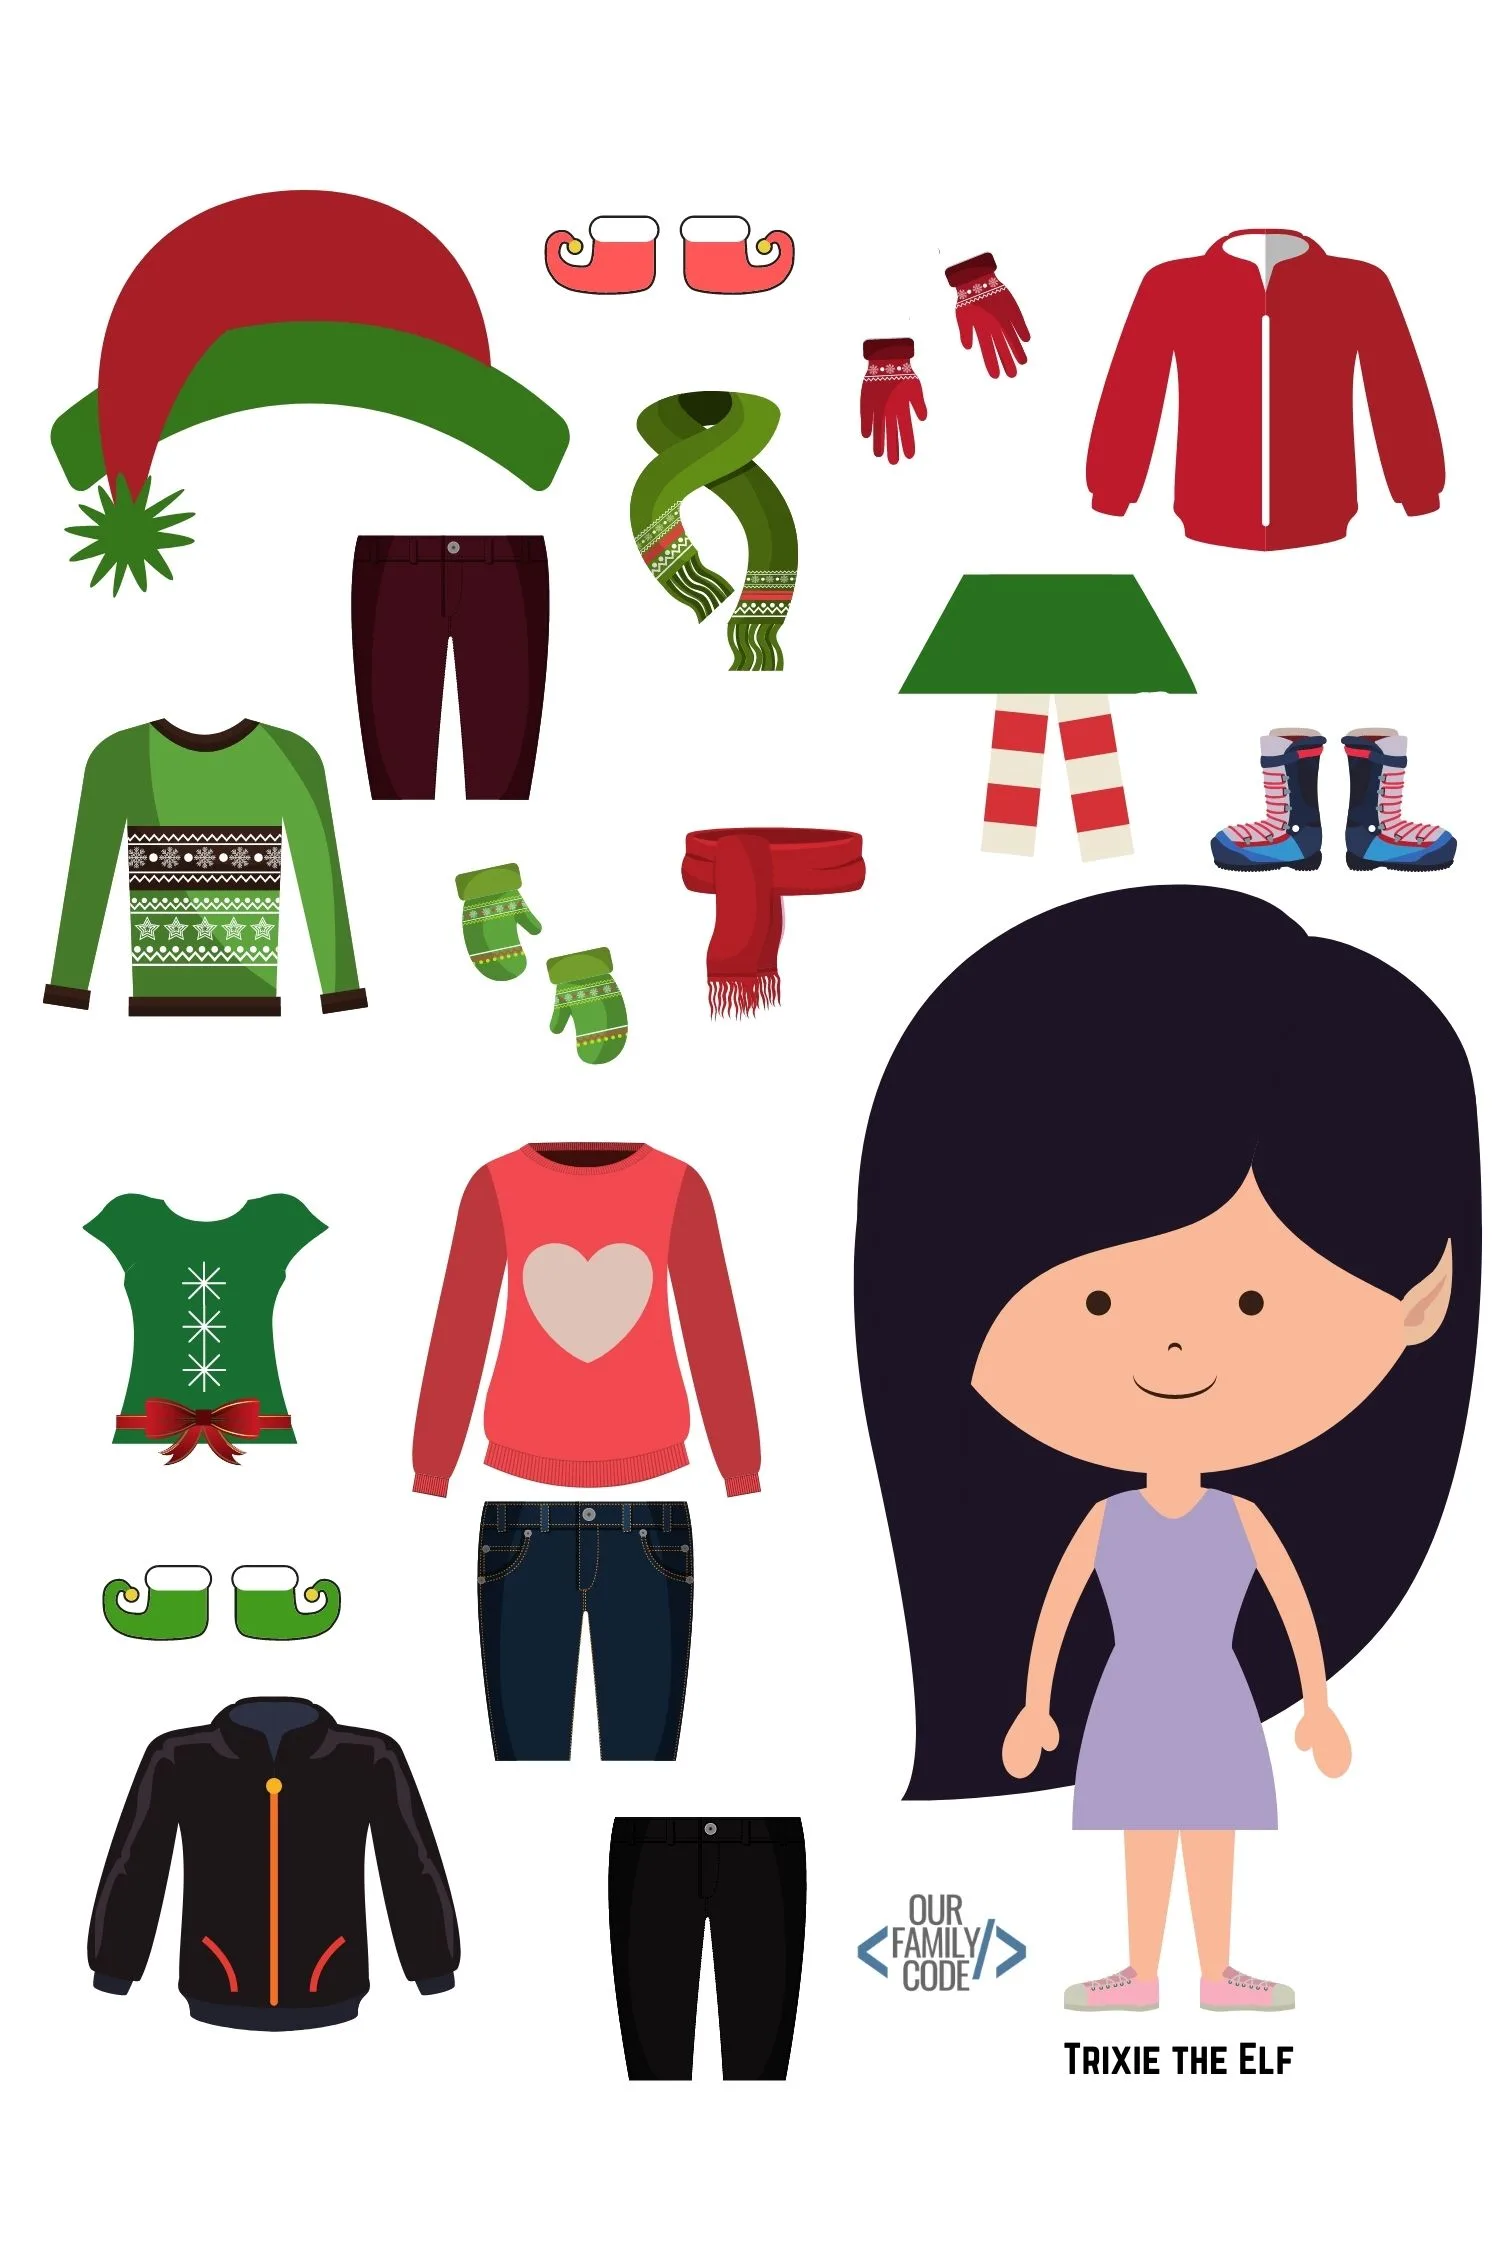 Learn how to use boolean expressions to search for the right outfit in this Christmas Elf boolean logic activity that teaches computer programming concepts such as selection and boolean operators. #teachkidstocode #STEM #STEAM #Christmas